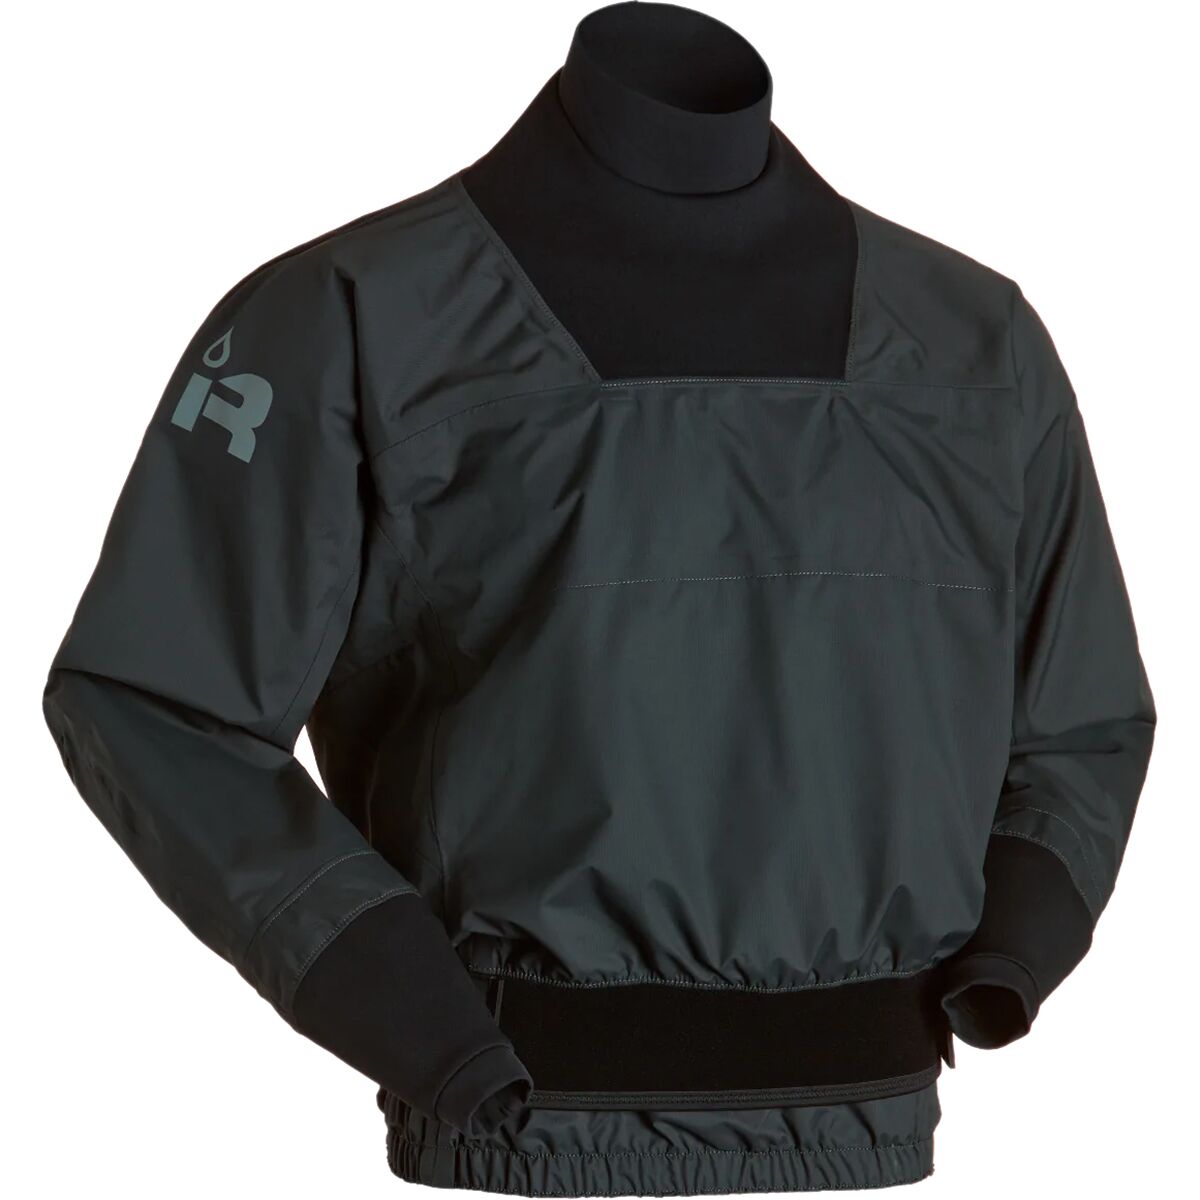 Immersion Research Rival Long-Sleeve Paddle Jacket - Men's